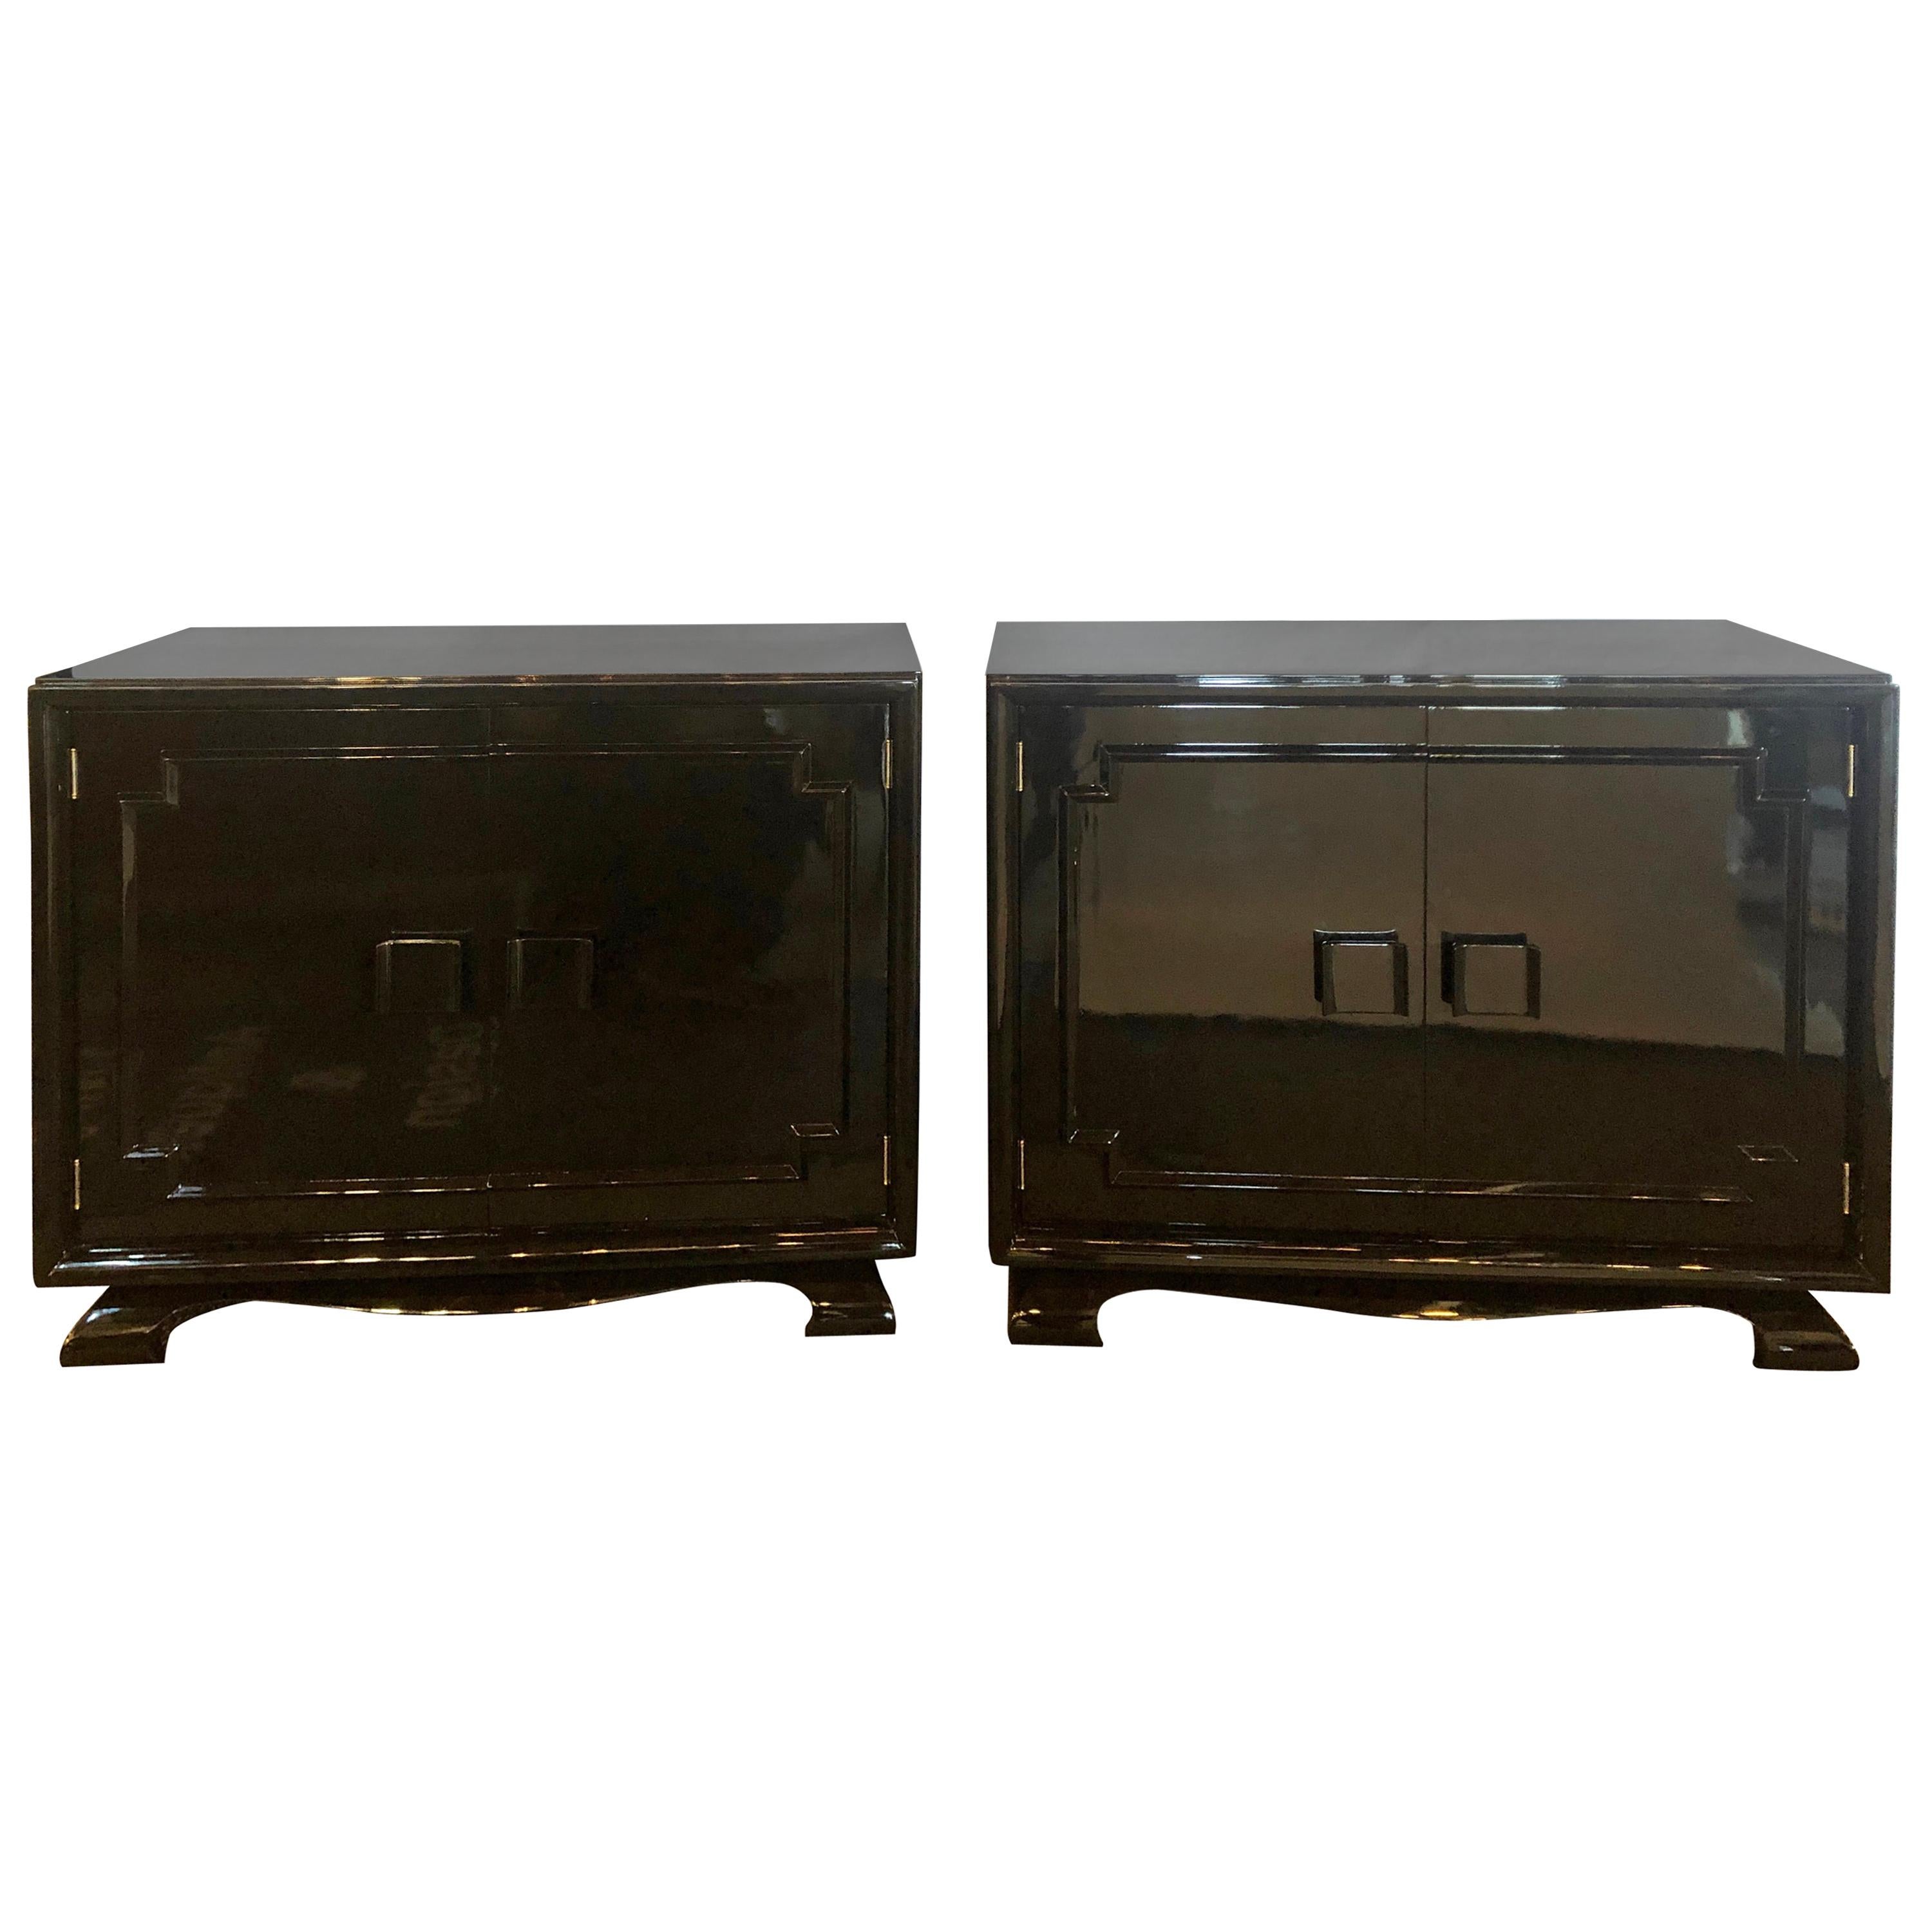 Pair of Modernist Asian Inspired Ebony Bachelor Chests in James Mont Style